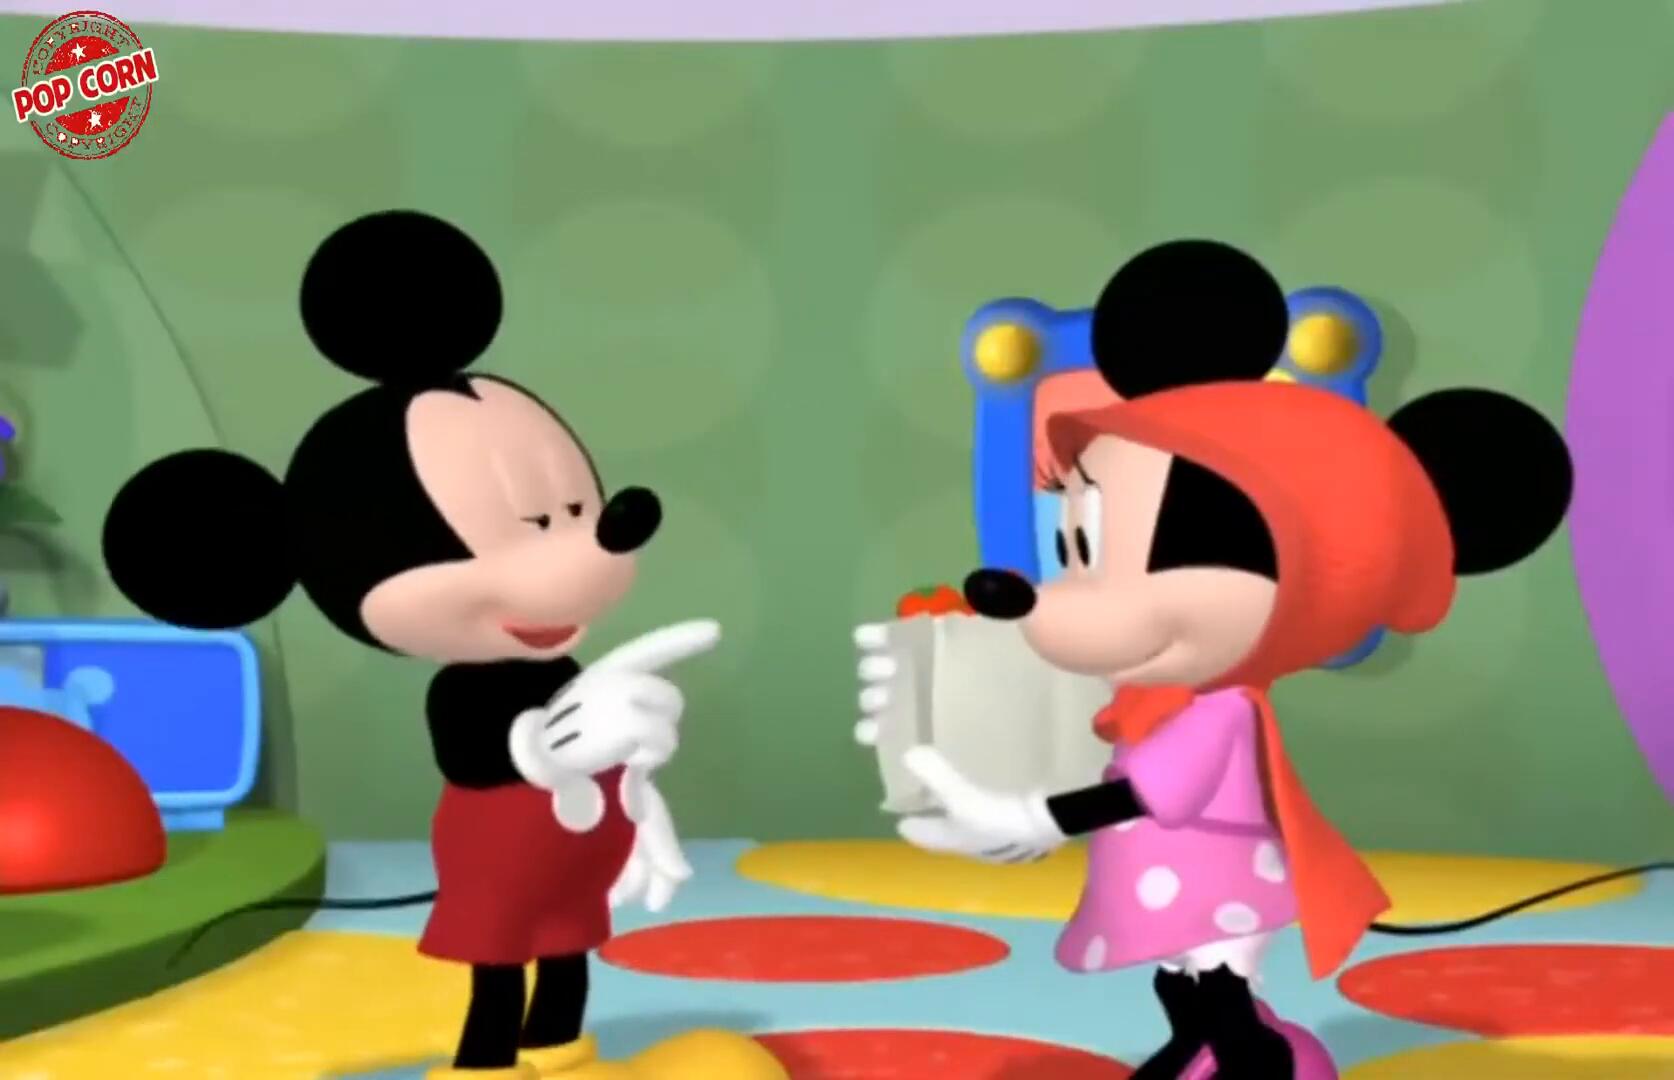 Minnie Red Riding Hood, S1 E18, Full Episode